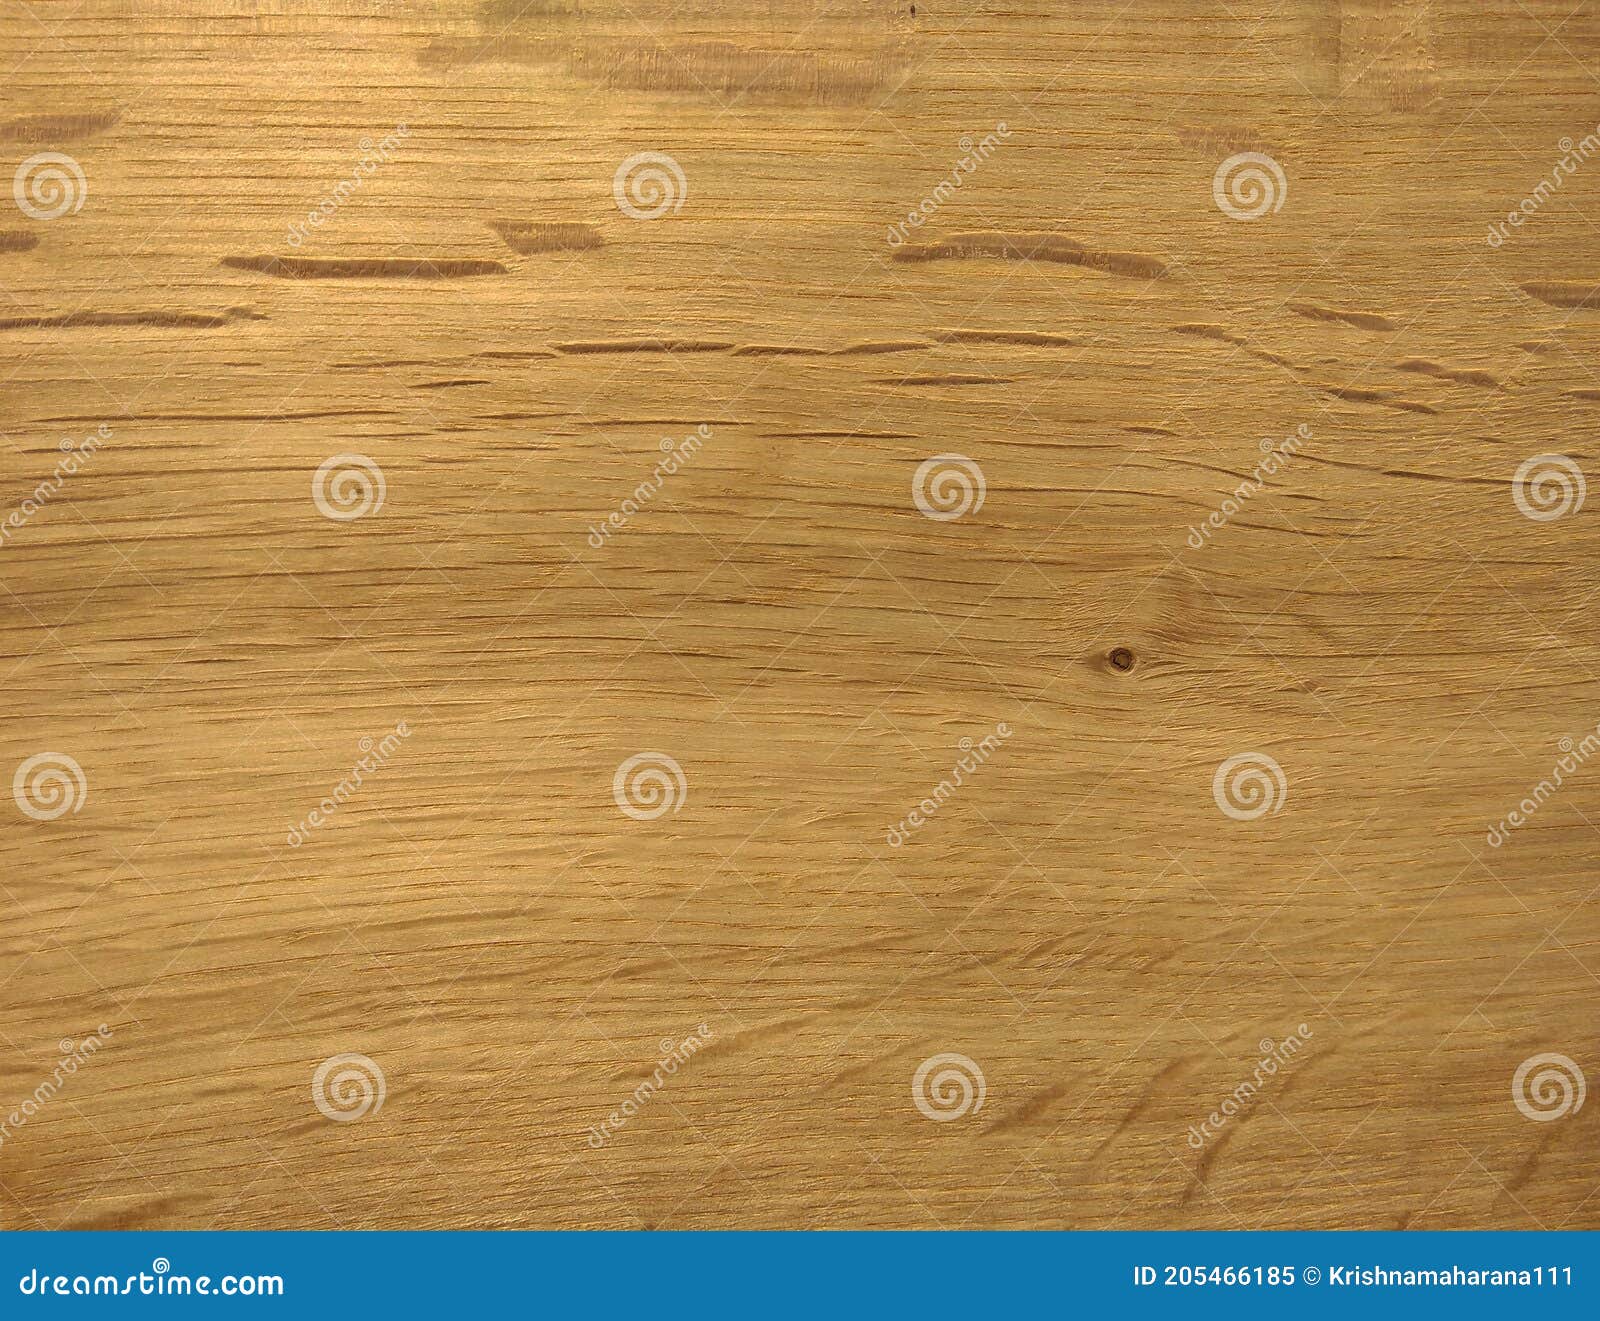 natural vintage rovere wood texture background. vintage rovere veneer surface for interior and exterior manufacturers use